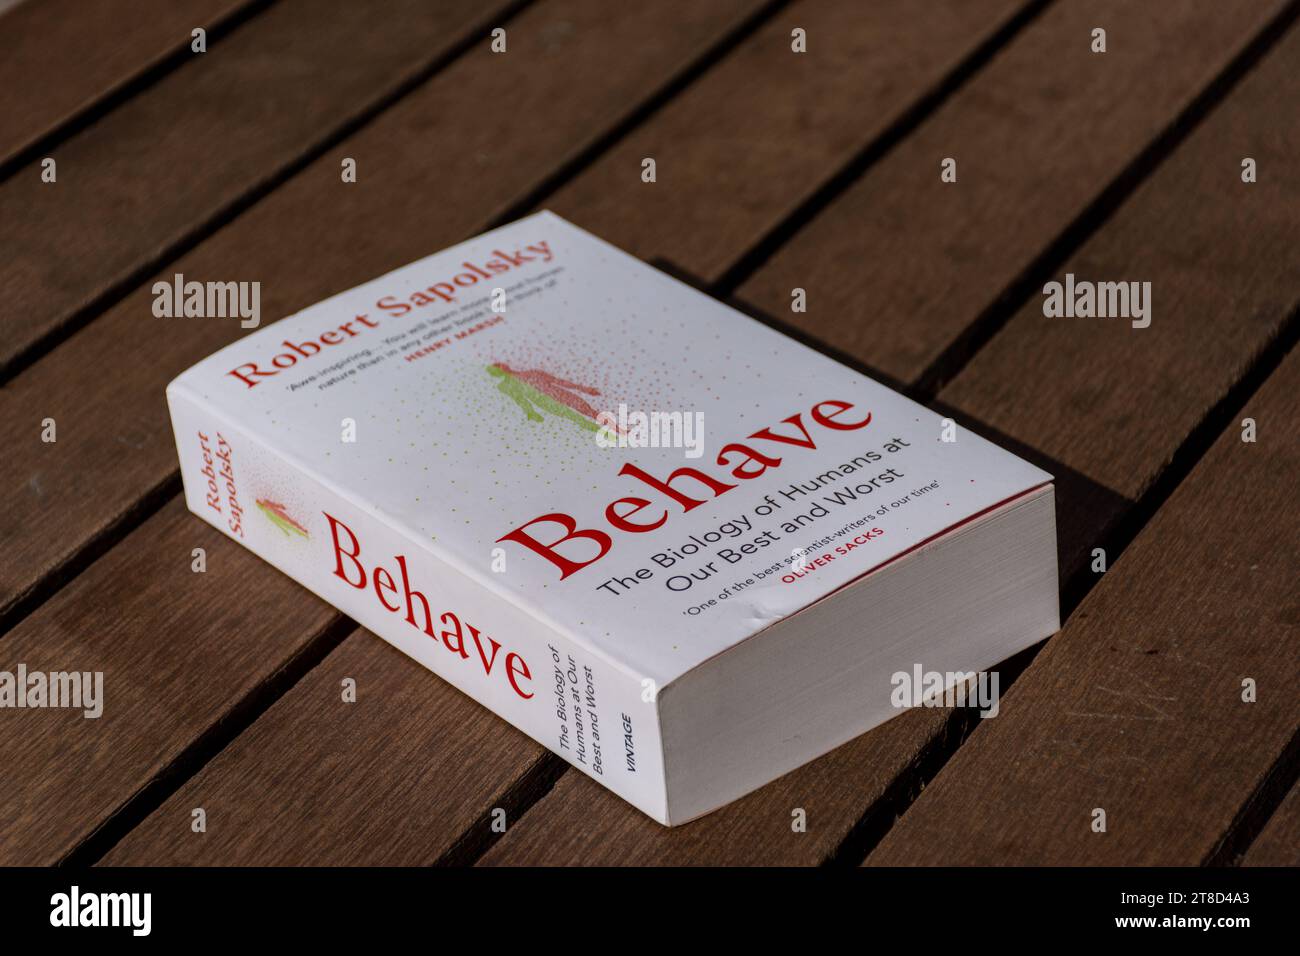 Close-up Robert Sapolsky's Behave book on a wooden table. Stock Photo